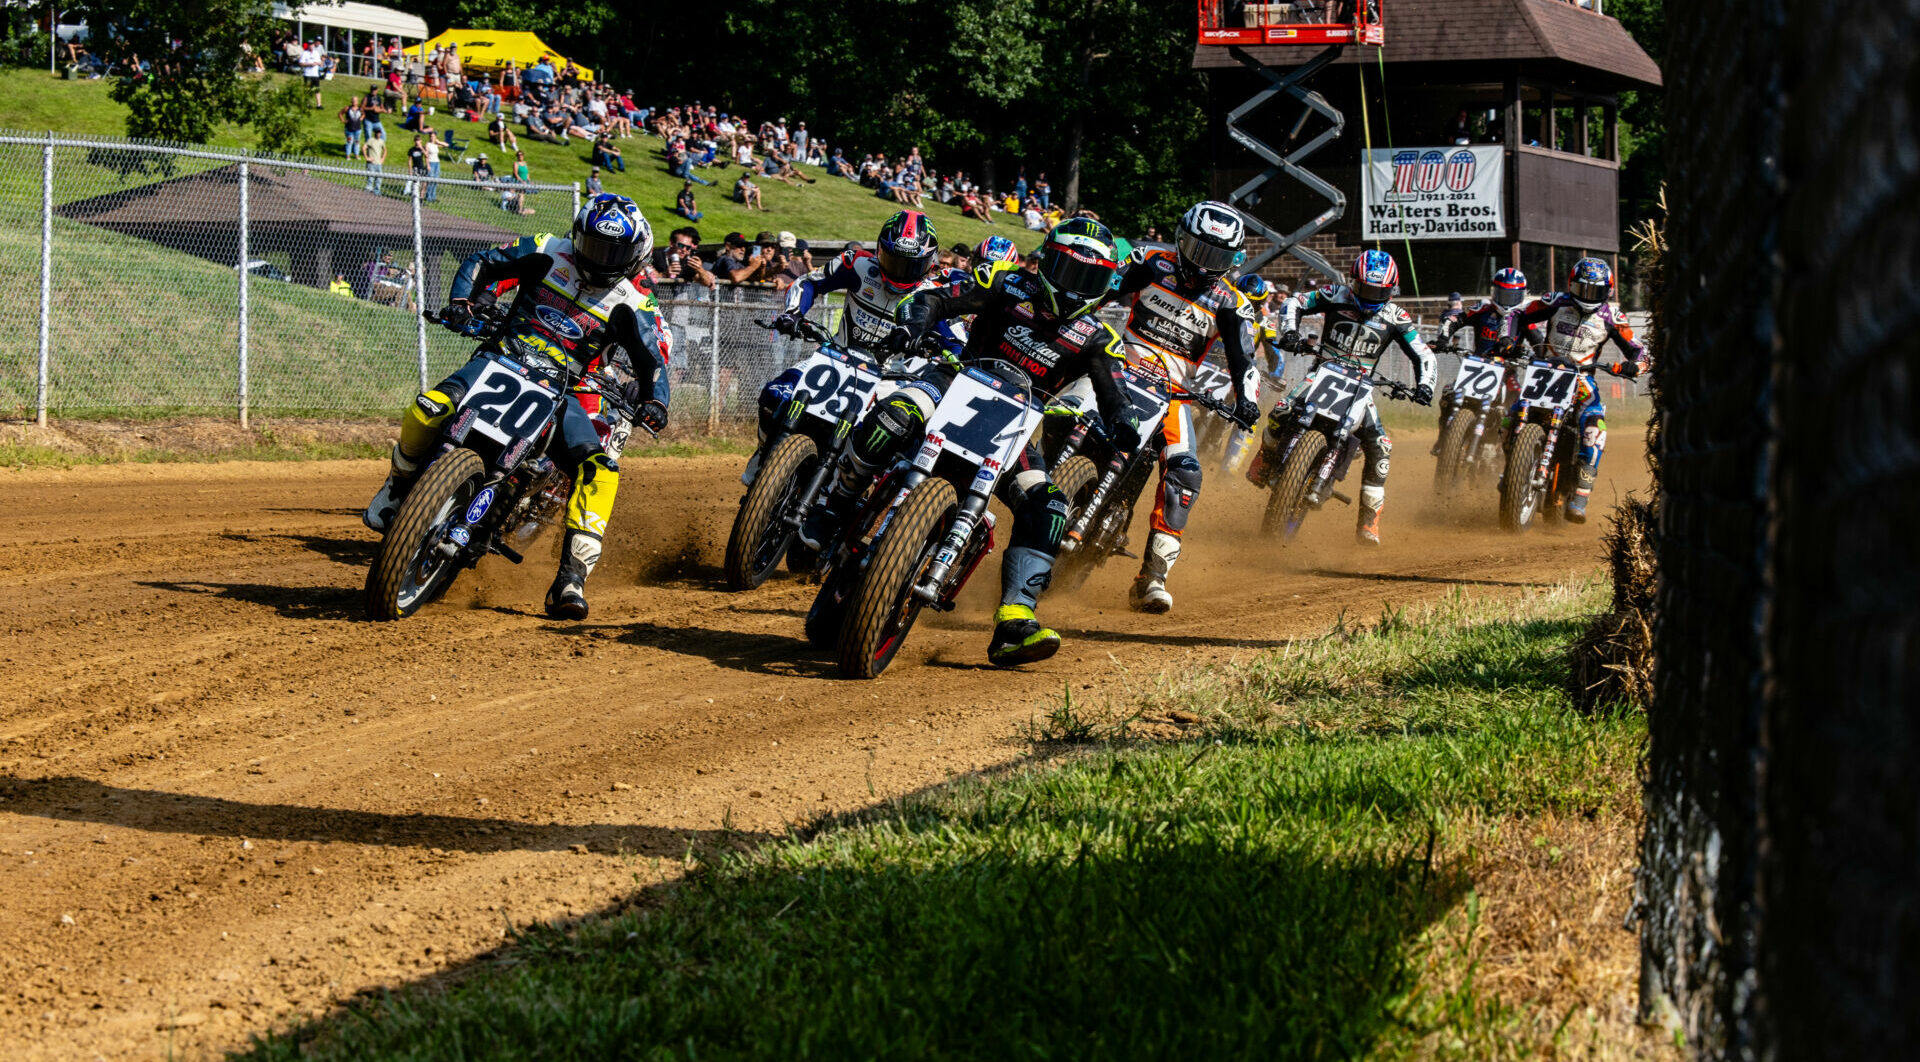 The start of the AFT Mission SuperTwins main event at the Peoria TT with Jared Mees (1) and Jarod VanDerKooi (20) leading the field. Photo by Tim Lester, courtesy AFT.